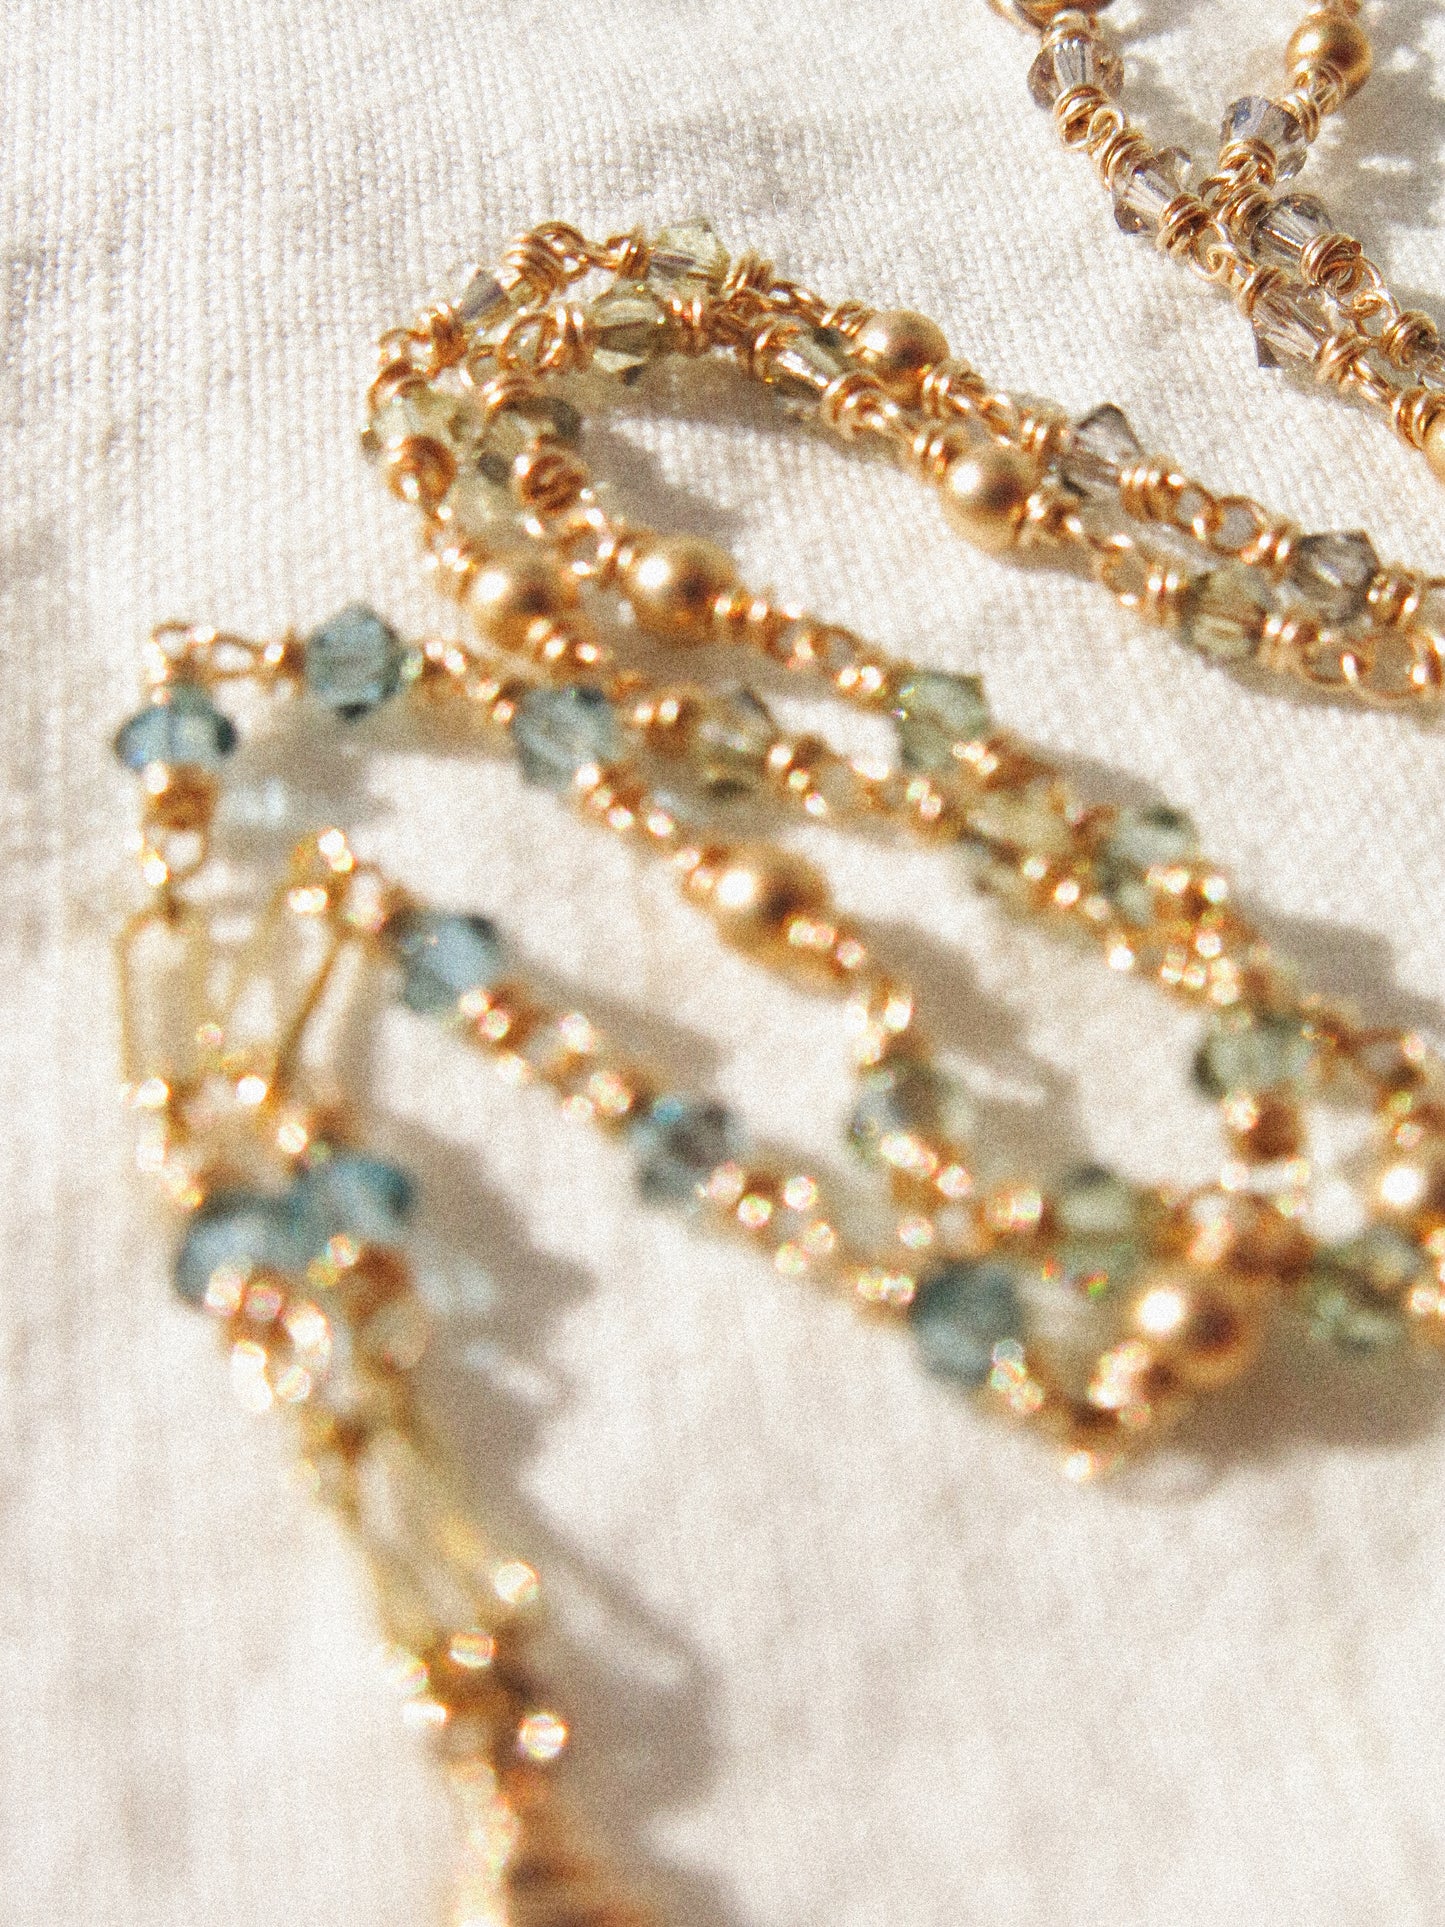 Geometric London Blue Topaz Necklace with Ombré Swarovski and Satin Gold Fill Bead Delicate Chain